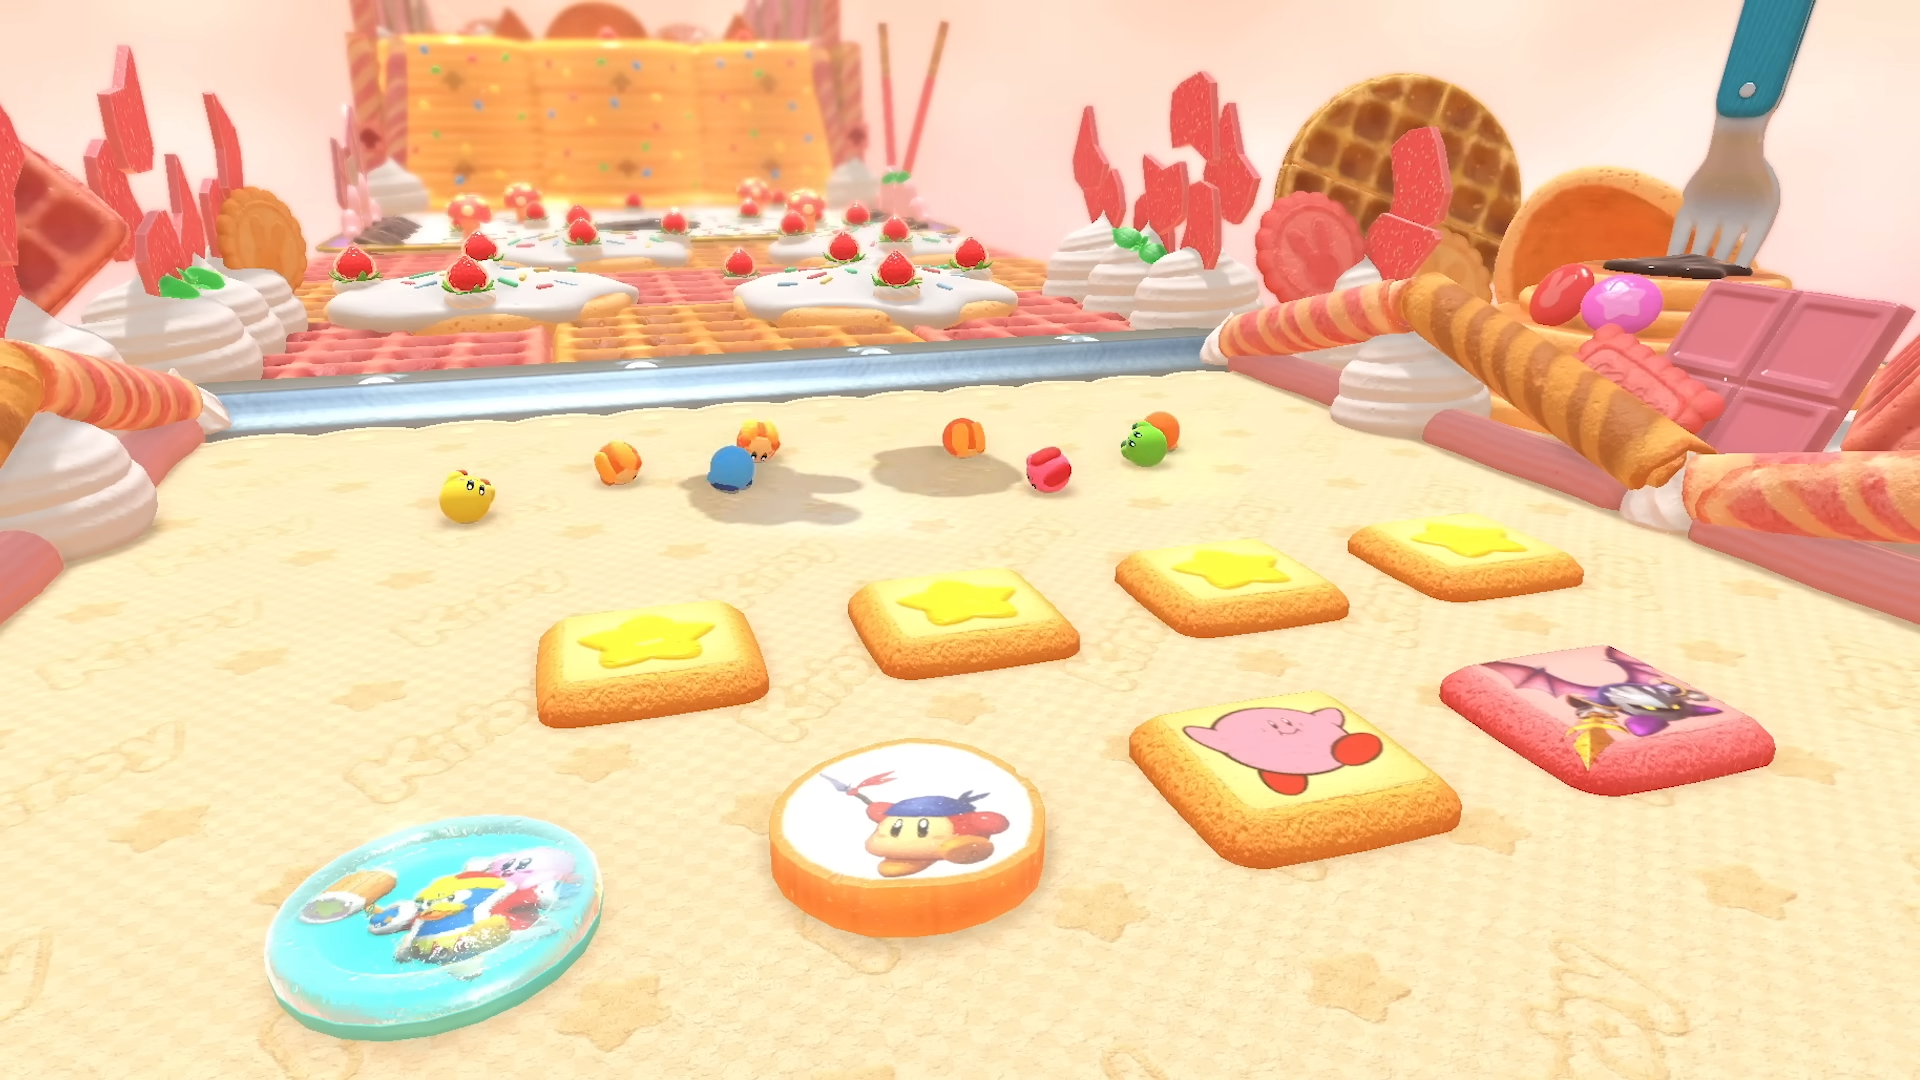 Kirby's Dream Buffet Review - Good Food, Tiny Portions - GameSpot